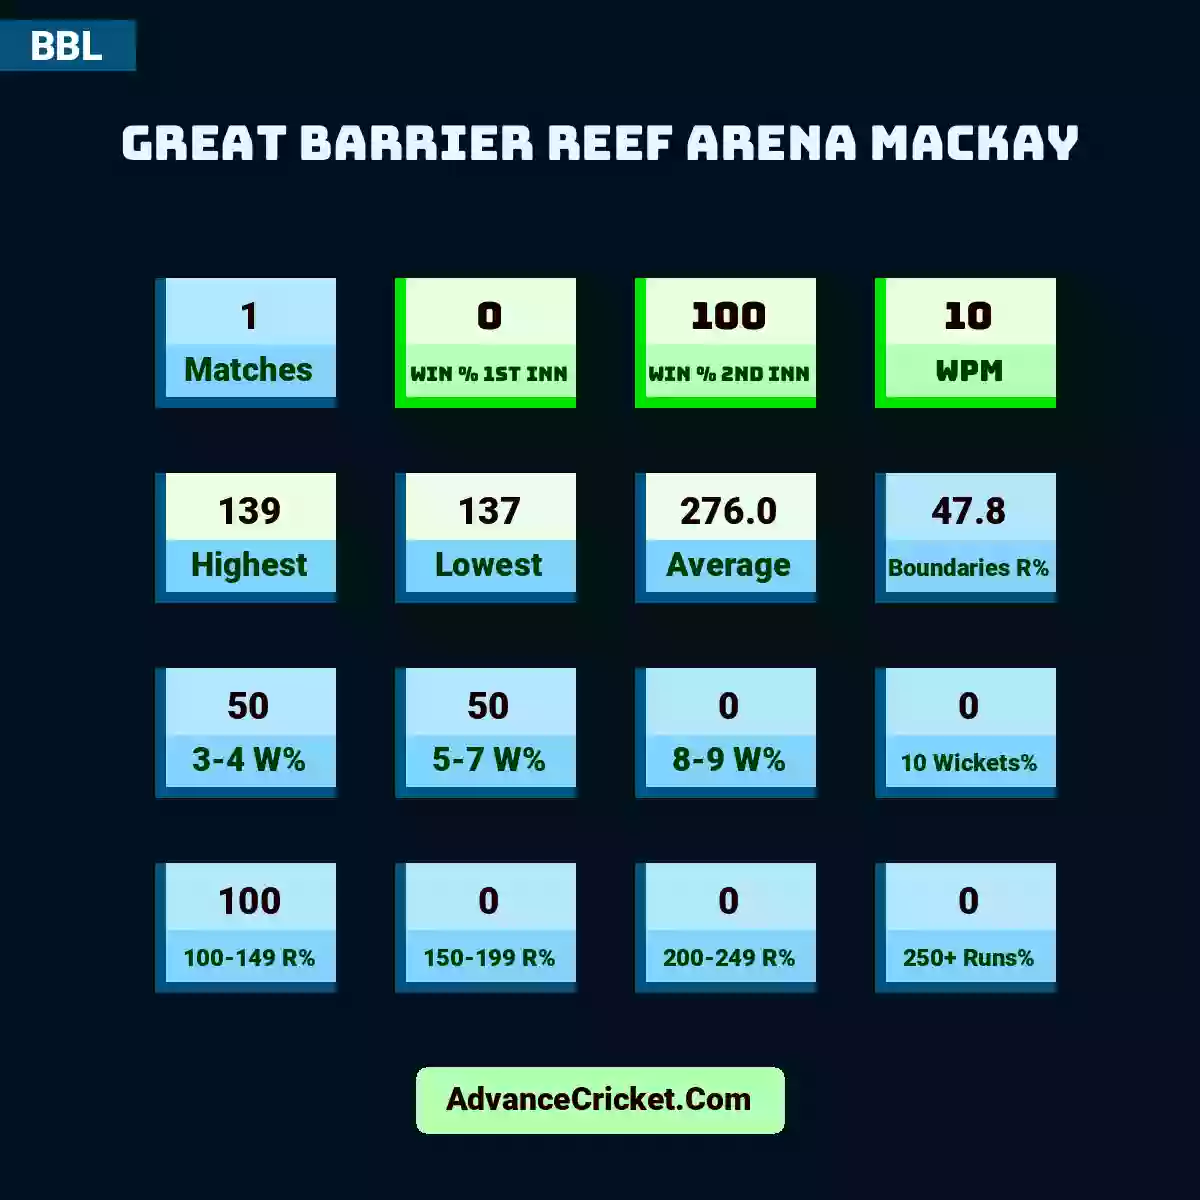 Image showing Great Barrier Reef Arena Mackay with Matches: 1, Win % 1st Inn: 0, Win % 2nd Inn: 100, WPM: 10, Highest: 139, Lowest: 137, Average: 276.0, Boundaries R%: 47.8, 3-4 W%: 50, 5-7 W%: 50, 8-9 W%: 0, 10 Wickets%: 0, 100-149 R%: 100, 150-199 R%: 0, 200-249 R%: 0, 250+ Runs%: 0.